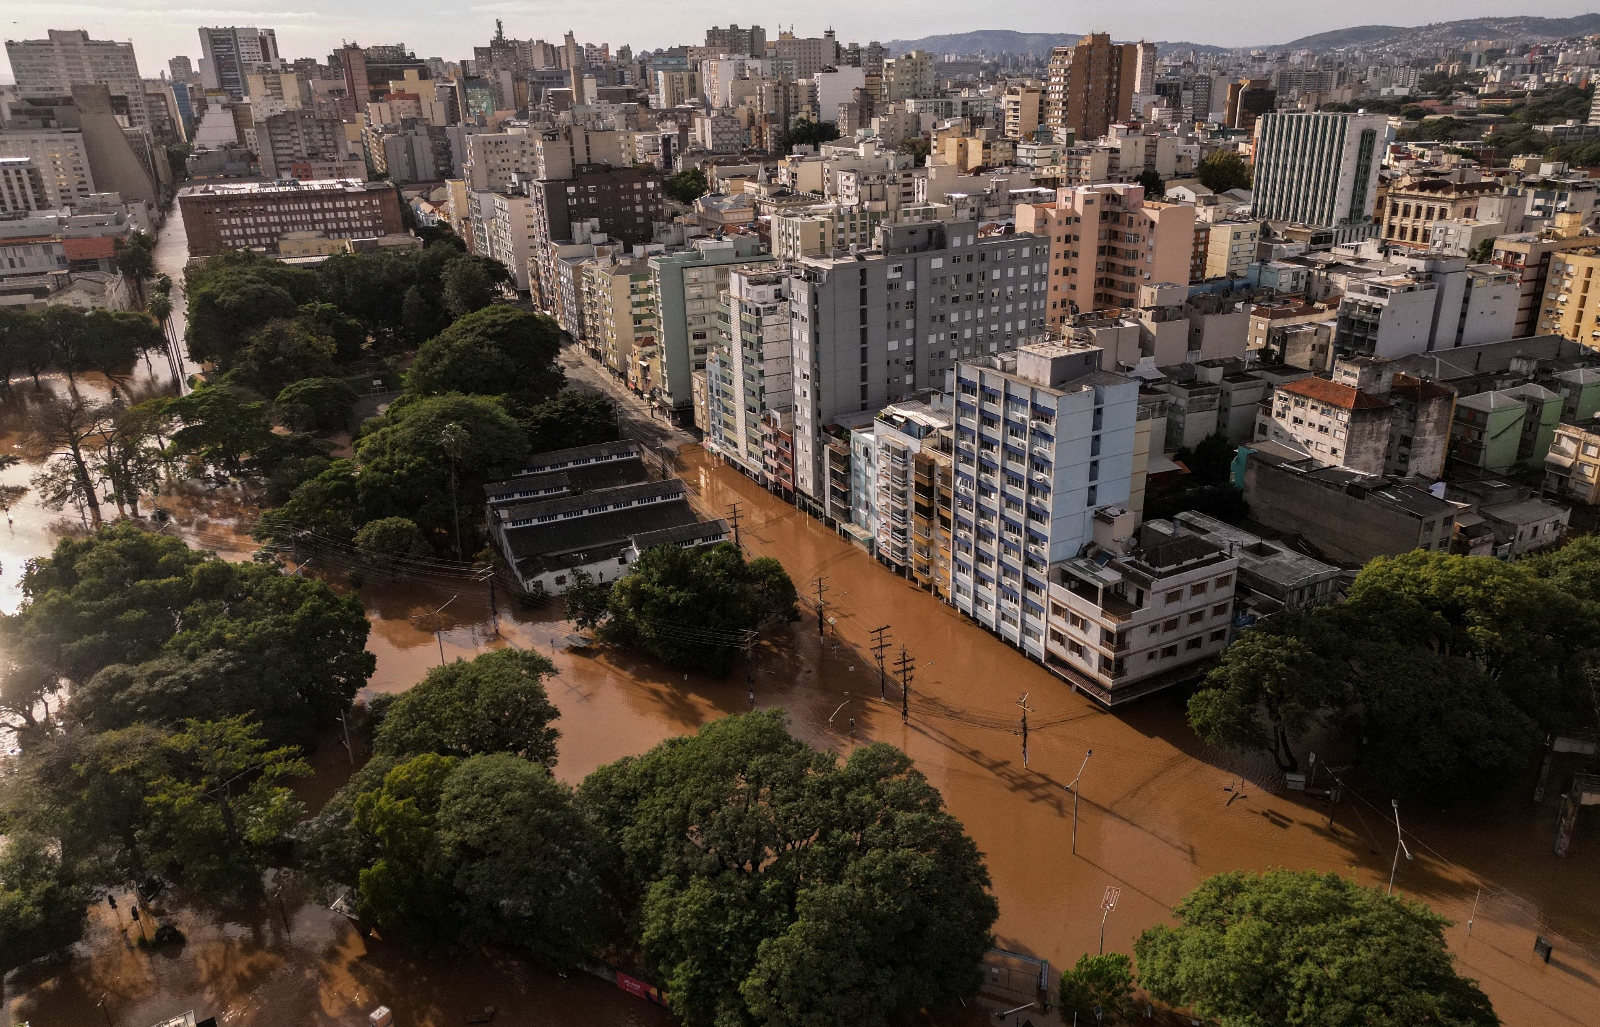 Aerial view of a city with white high-rise buildings flooded by brown floodwater.